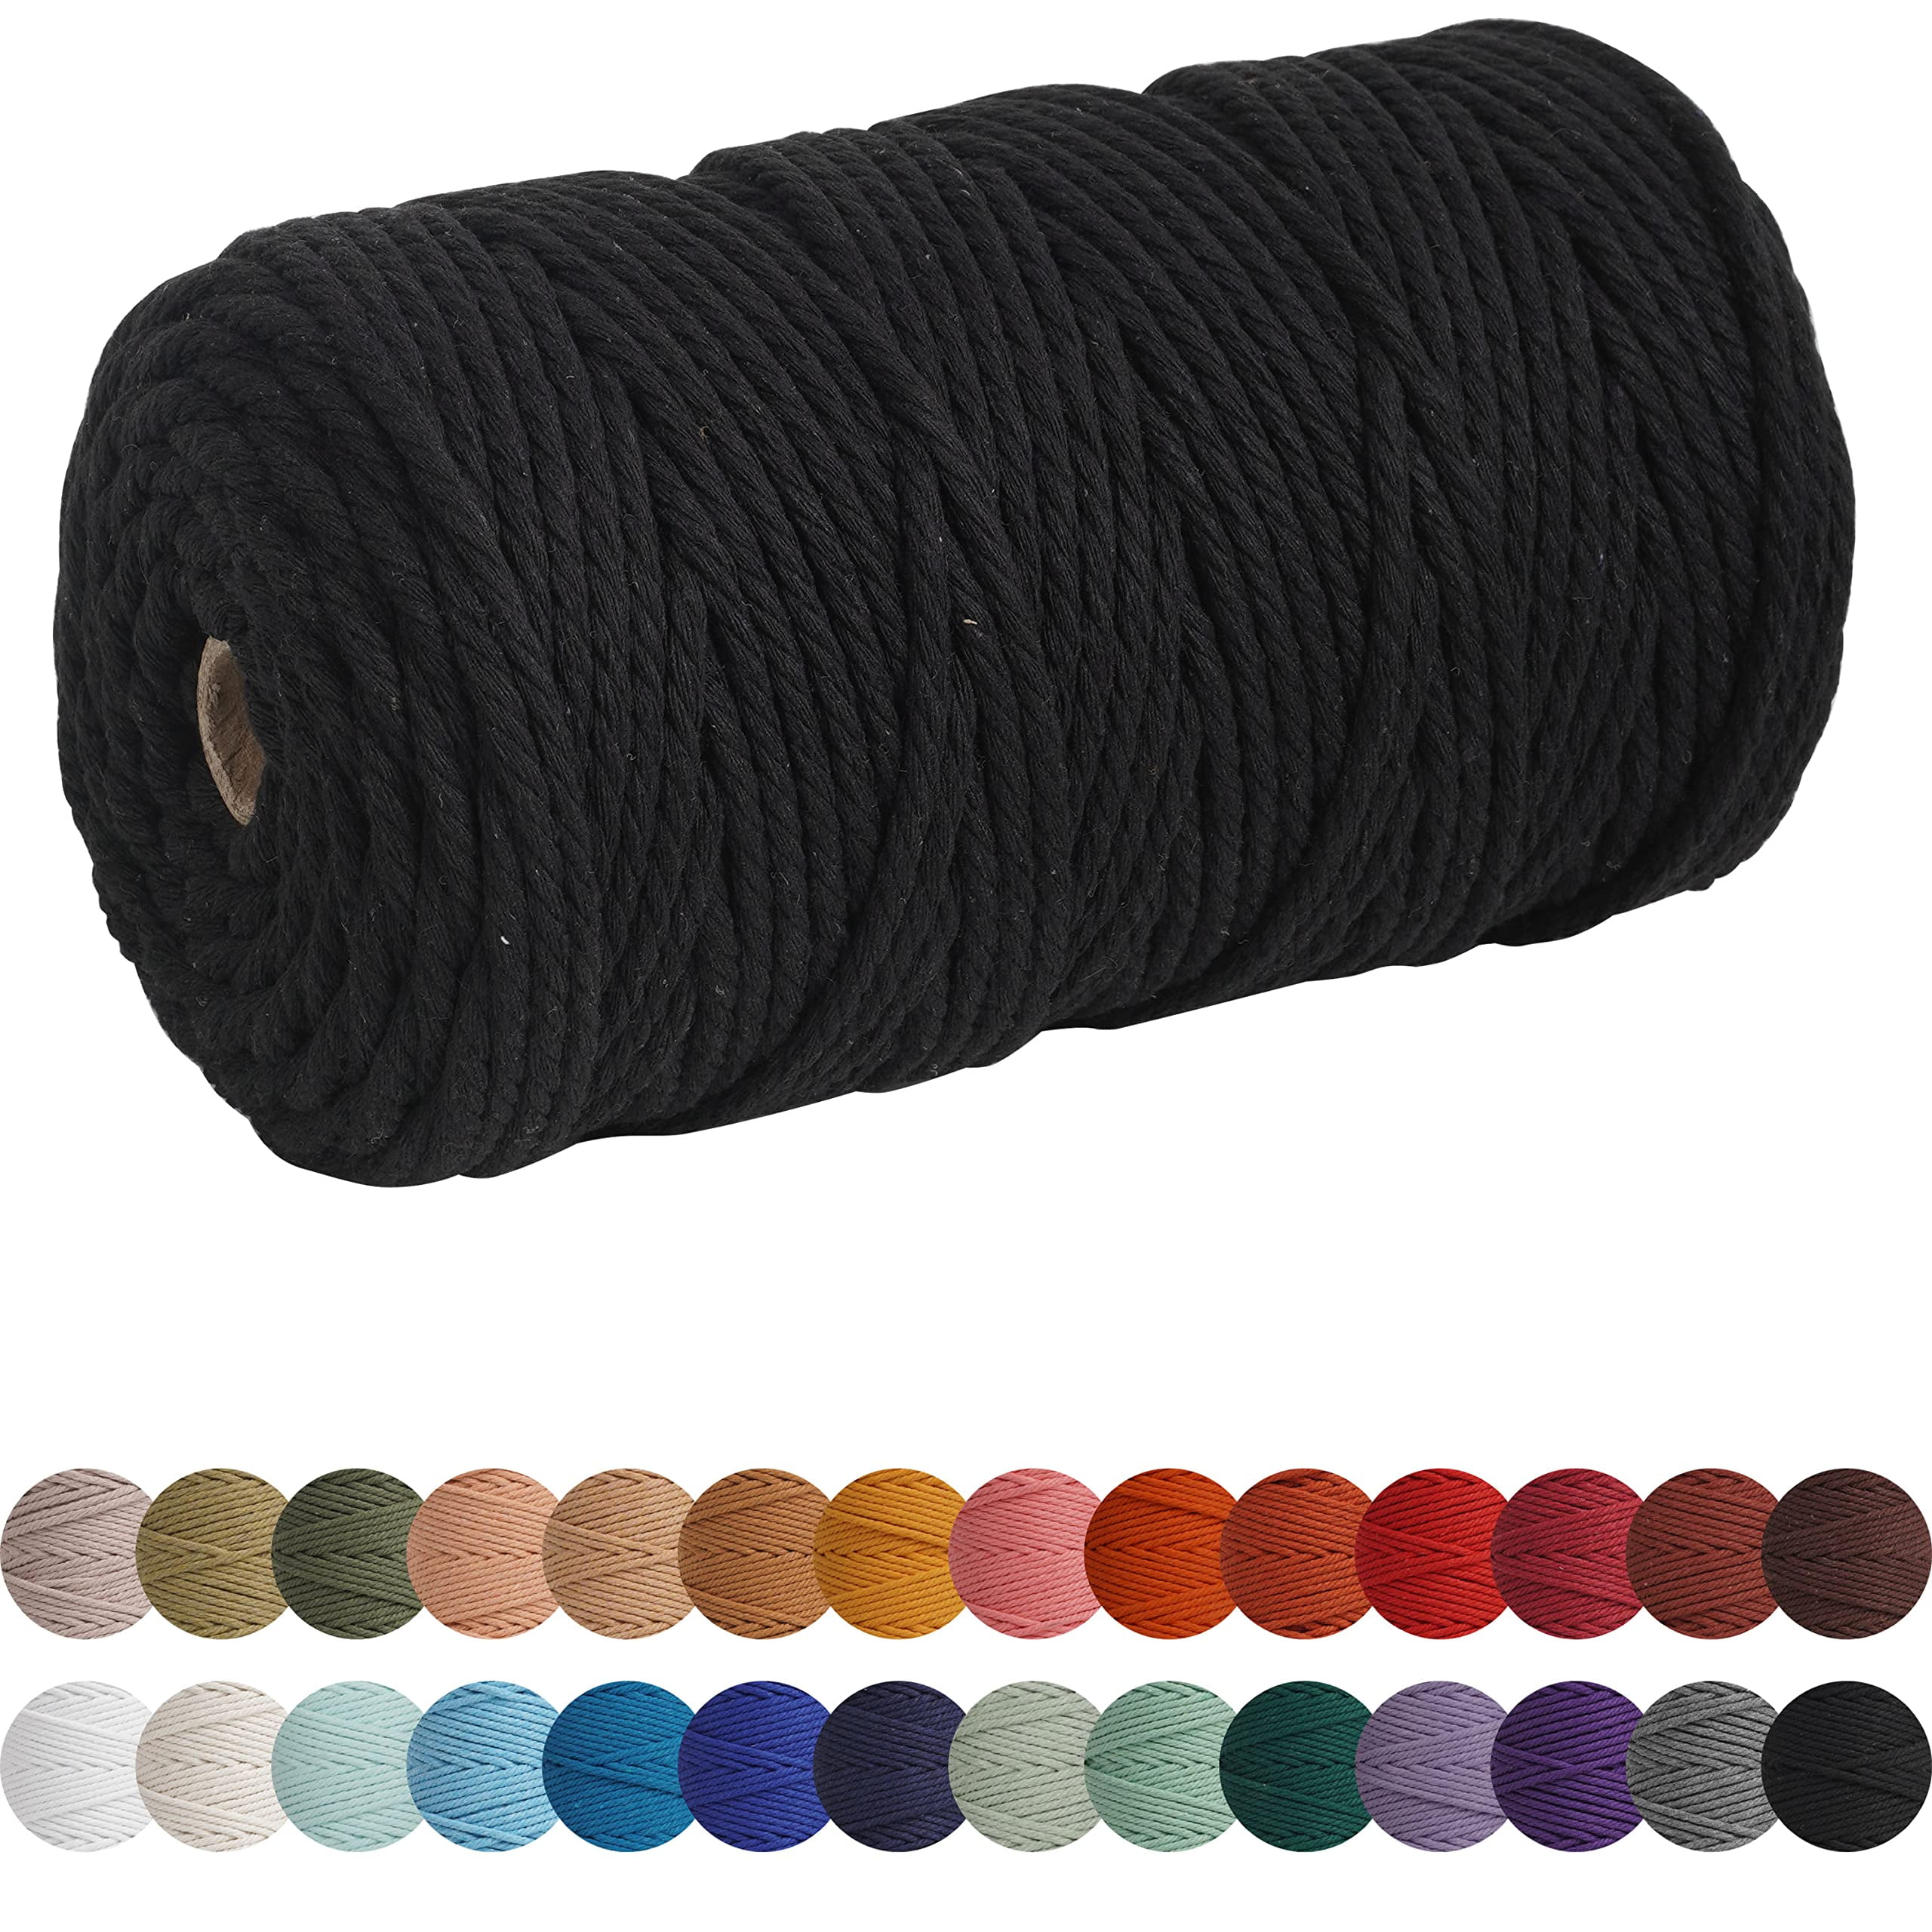 Gift Wrapping and Wedding Decorations Colored Natural Cotton Macrame Rope Macrame Cord 4mm x 109Yards Gray 3 Strands Twisted Macrame Cotton Cord for Wall Hanging Crafts Plant Hangers 